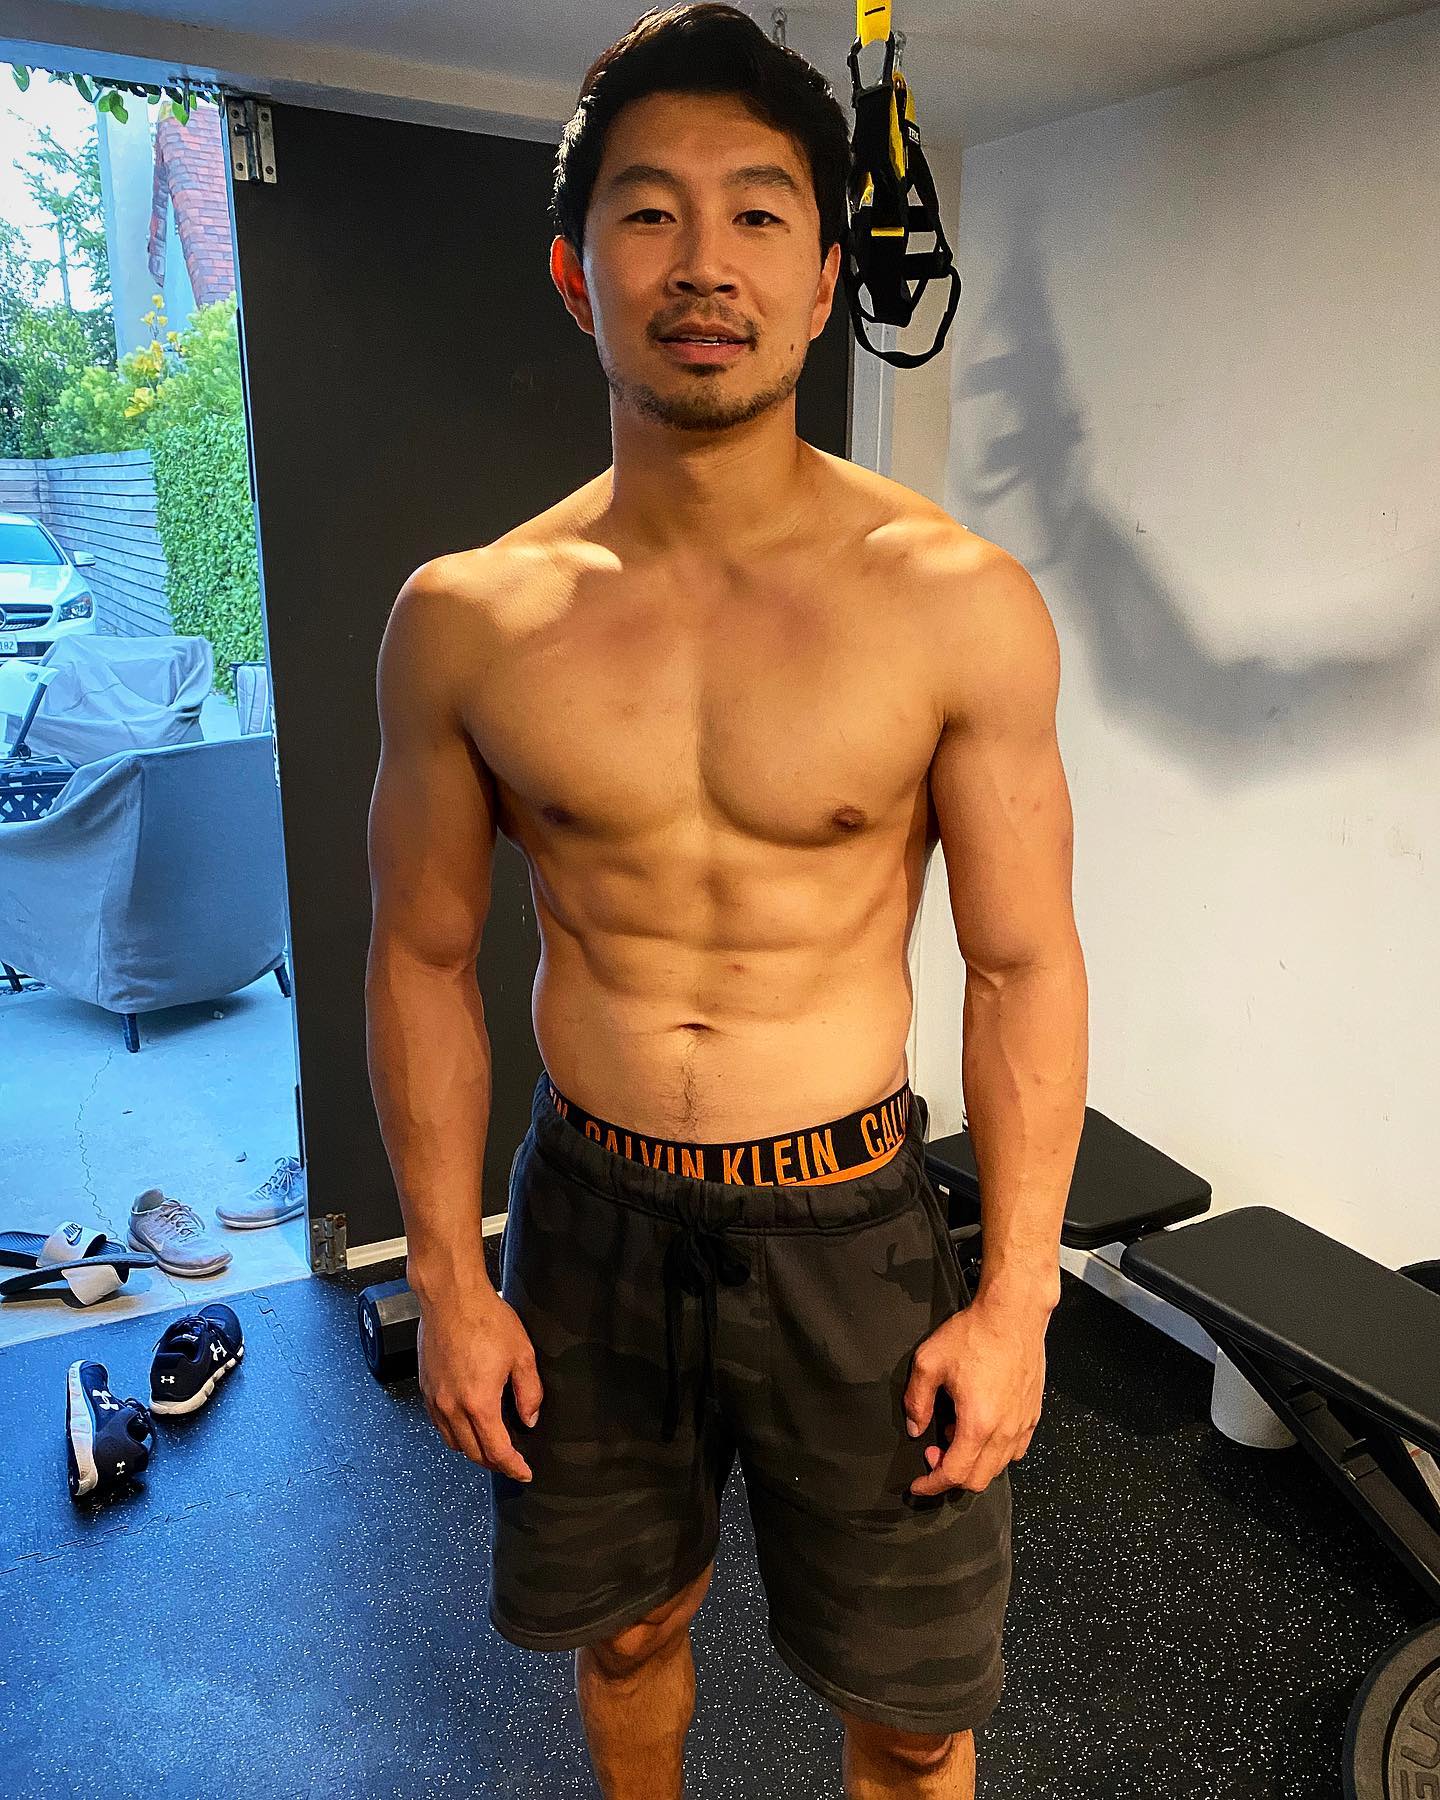 Is there a martial arts background for Simu Liu